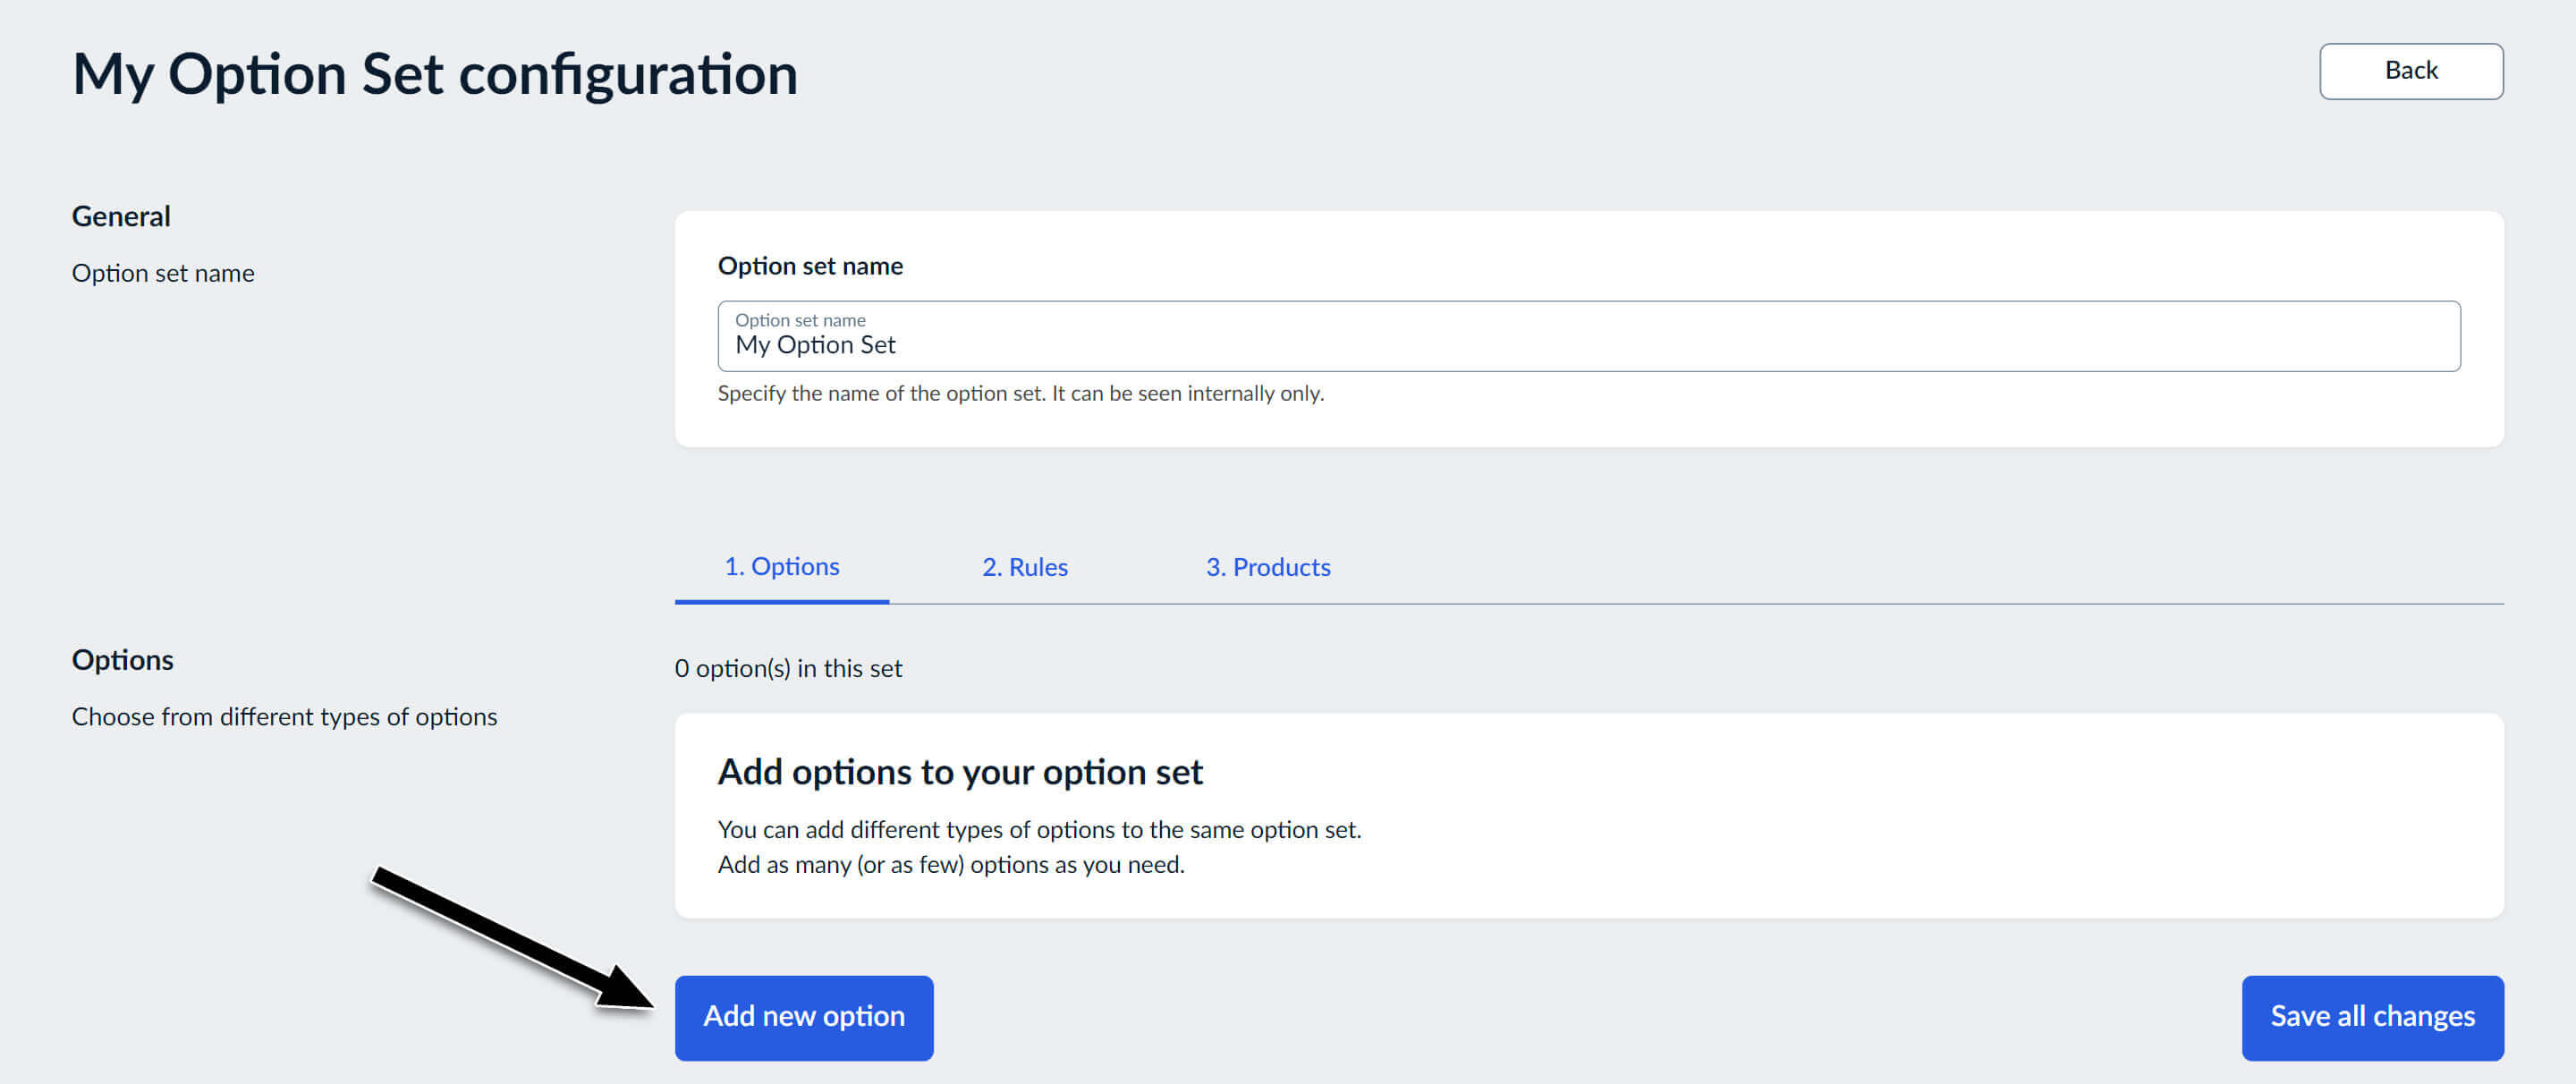 Now let's create options and values for the newly created option set